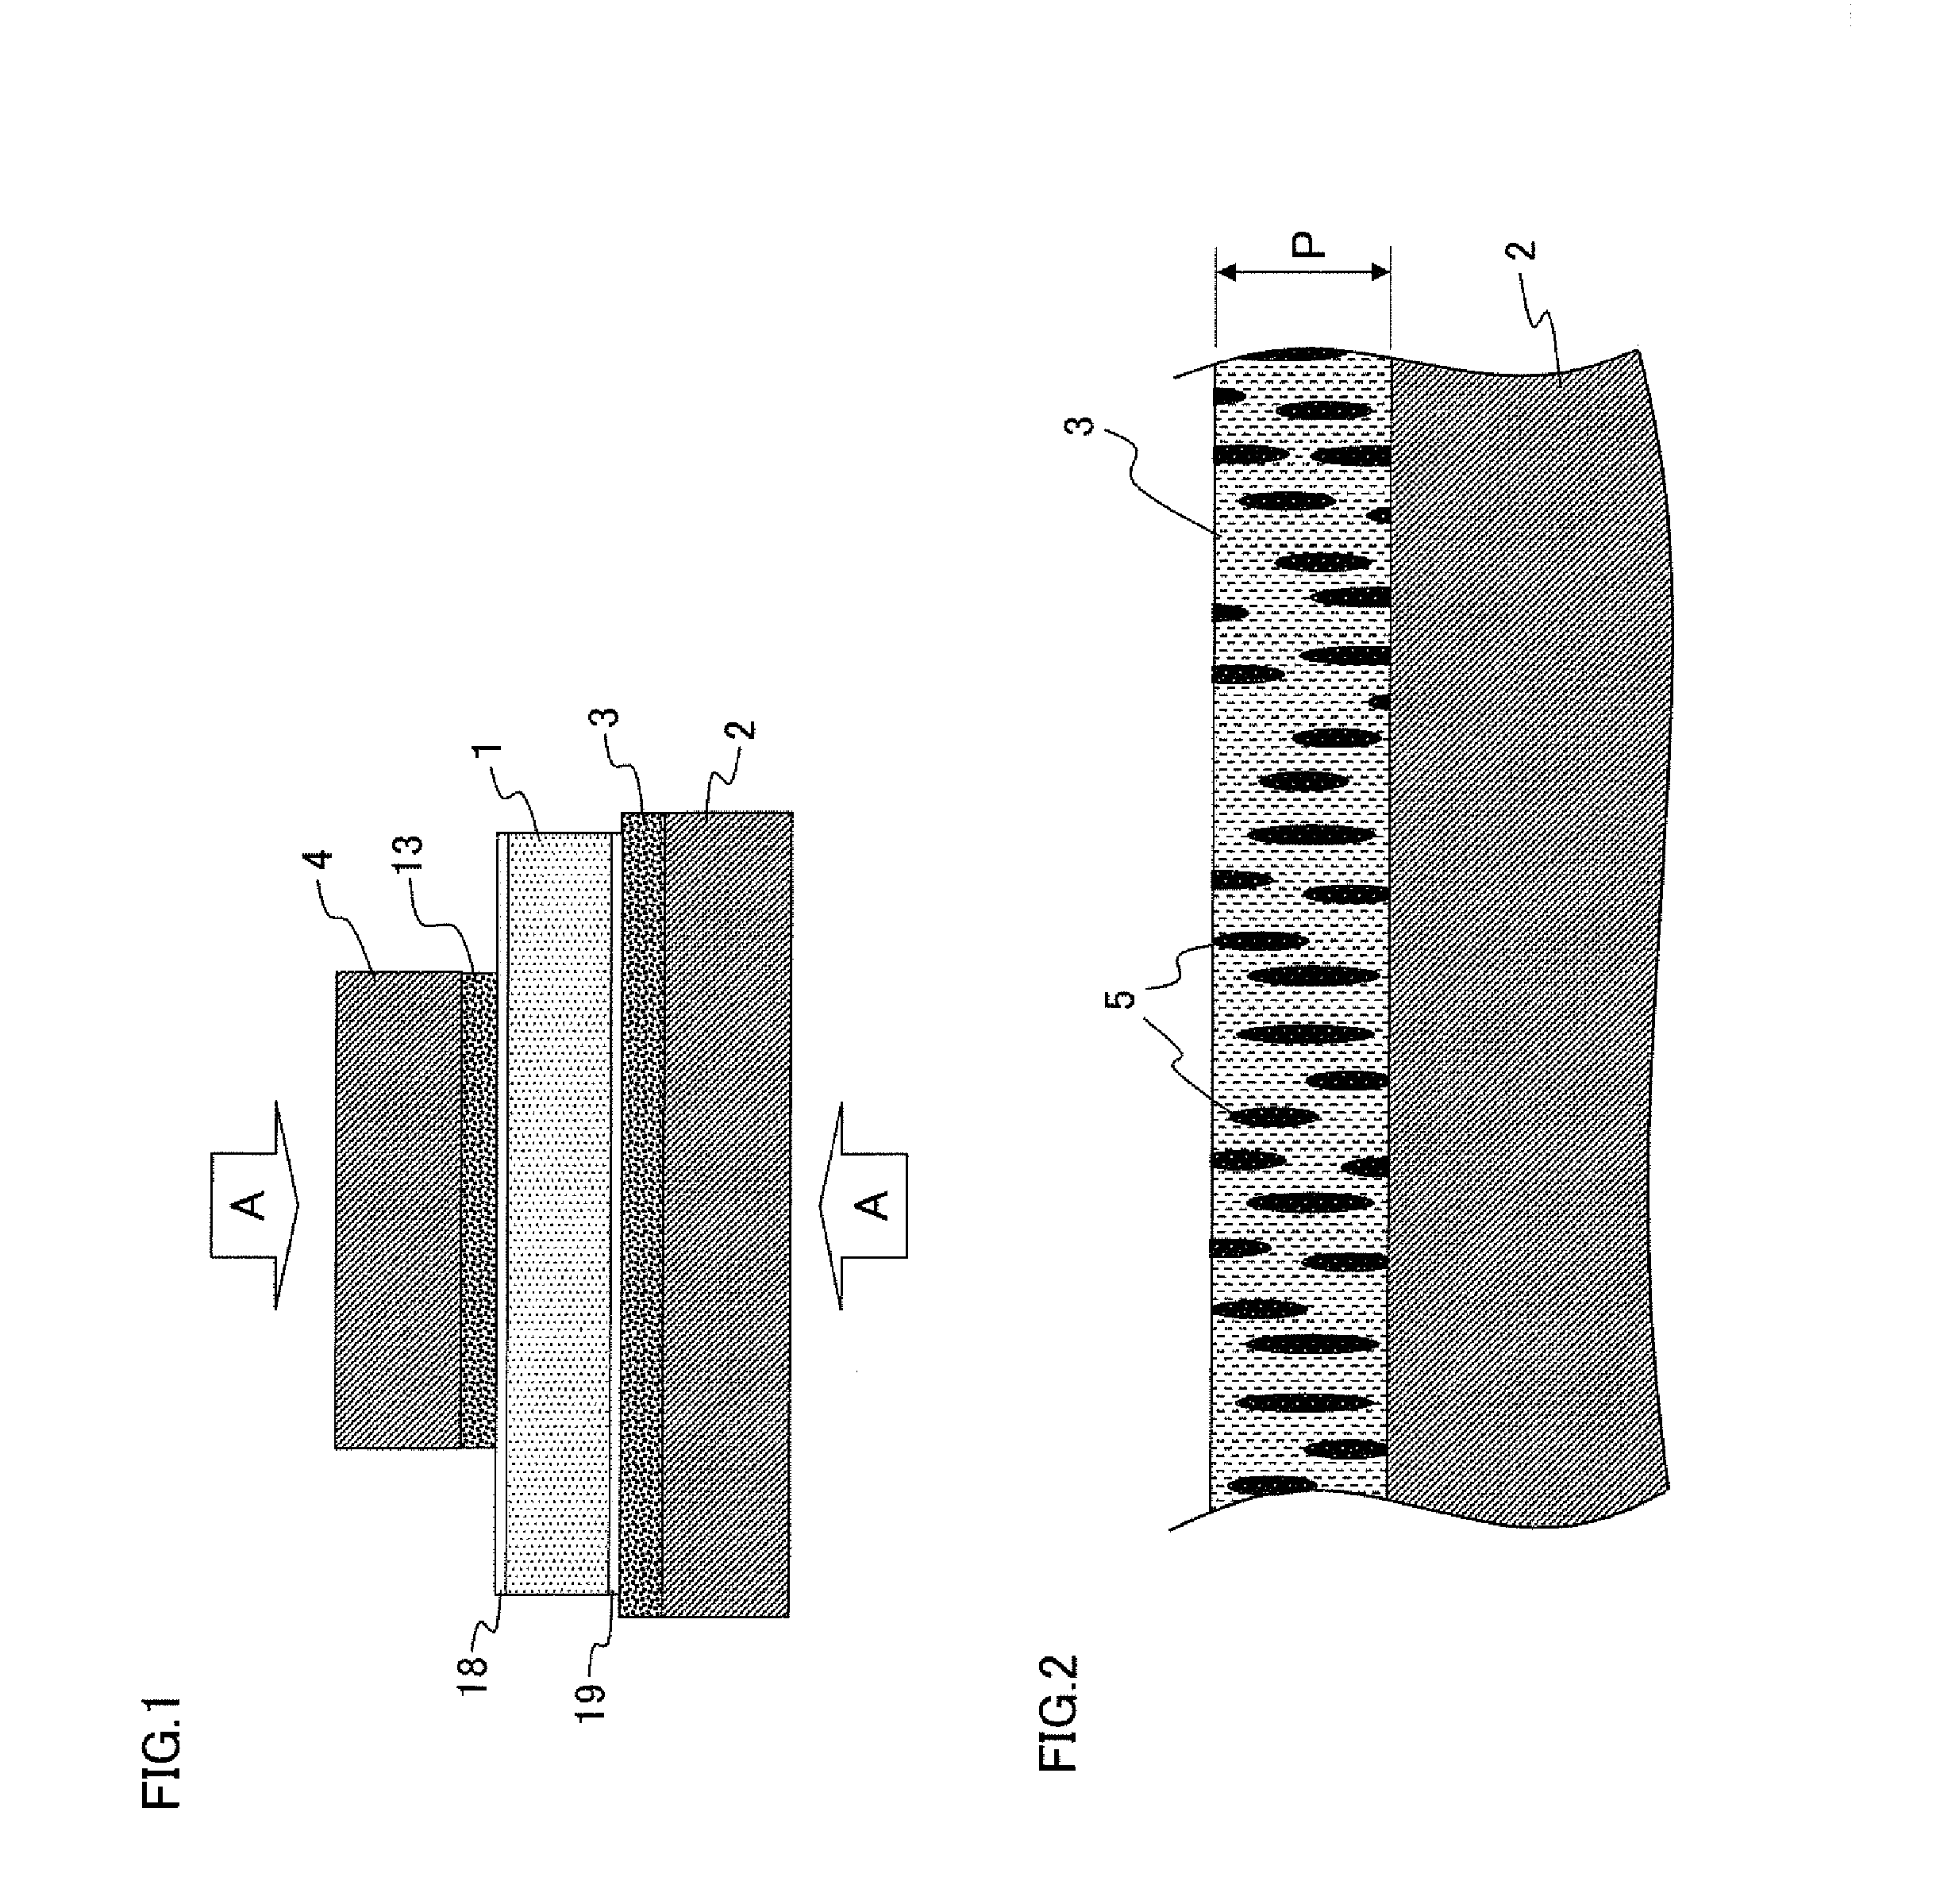 Pressed-contact type semiconductor device and method for manufacturing the same